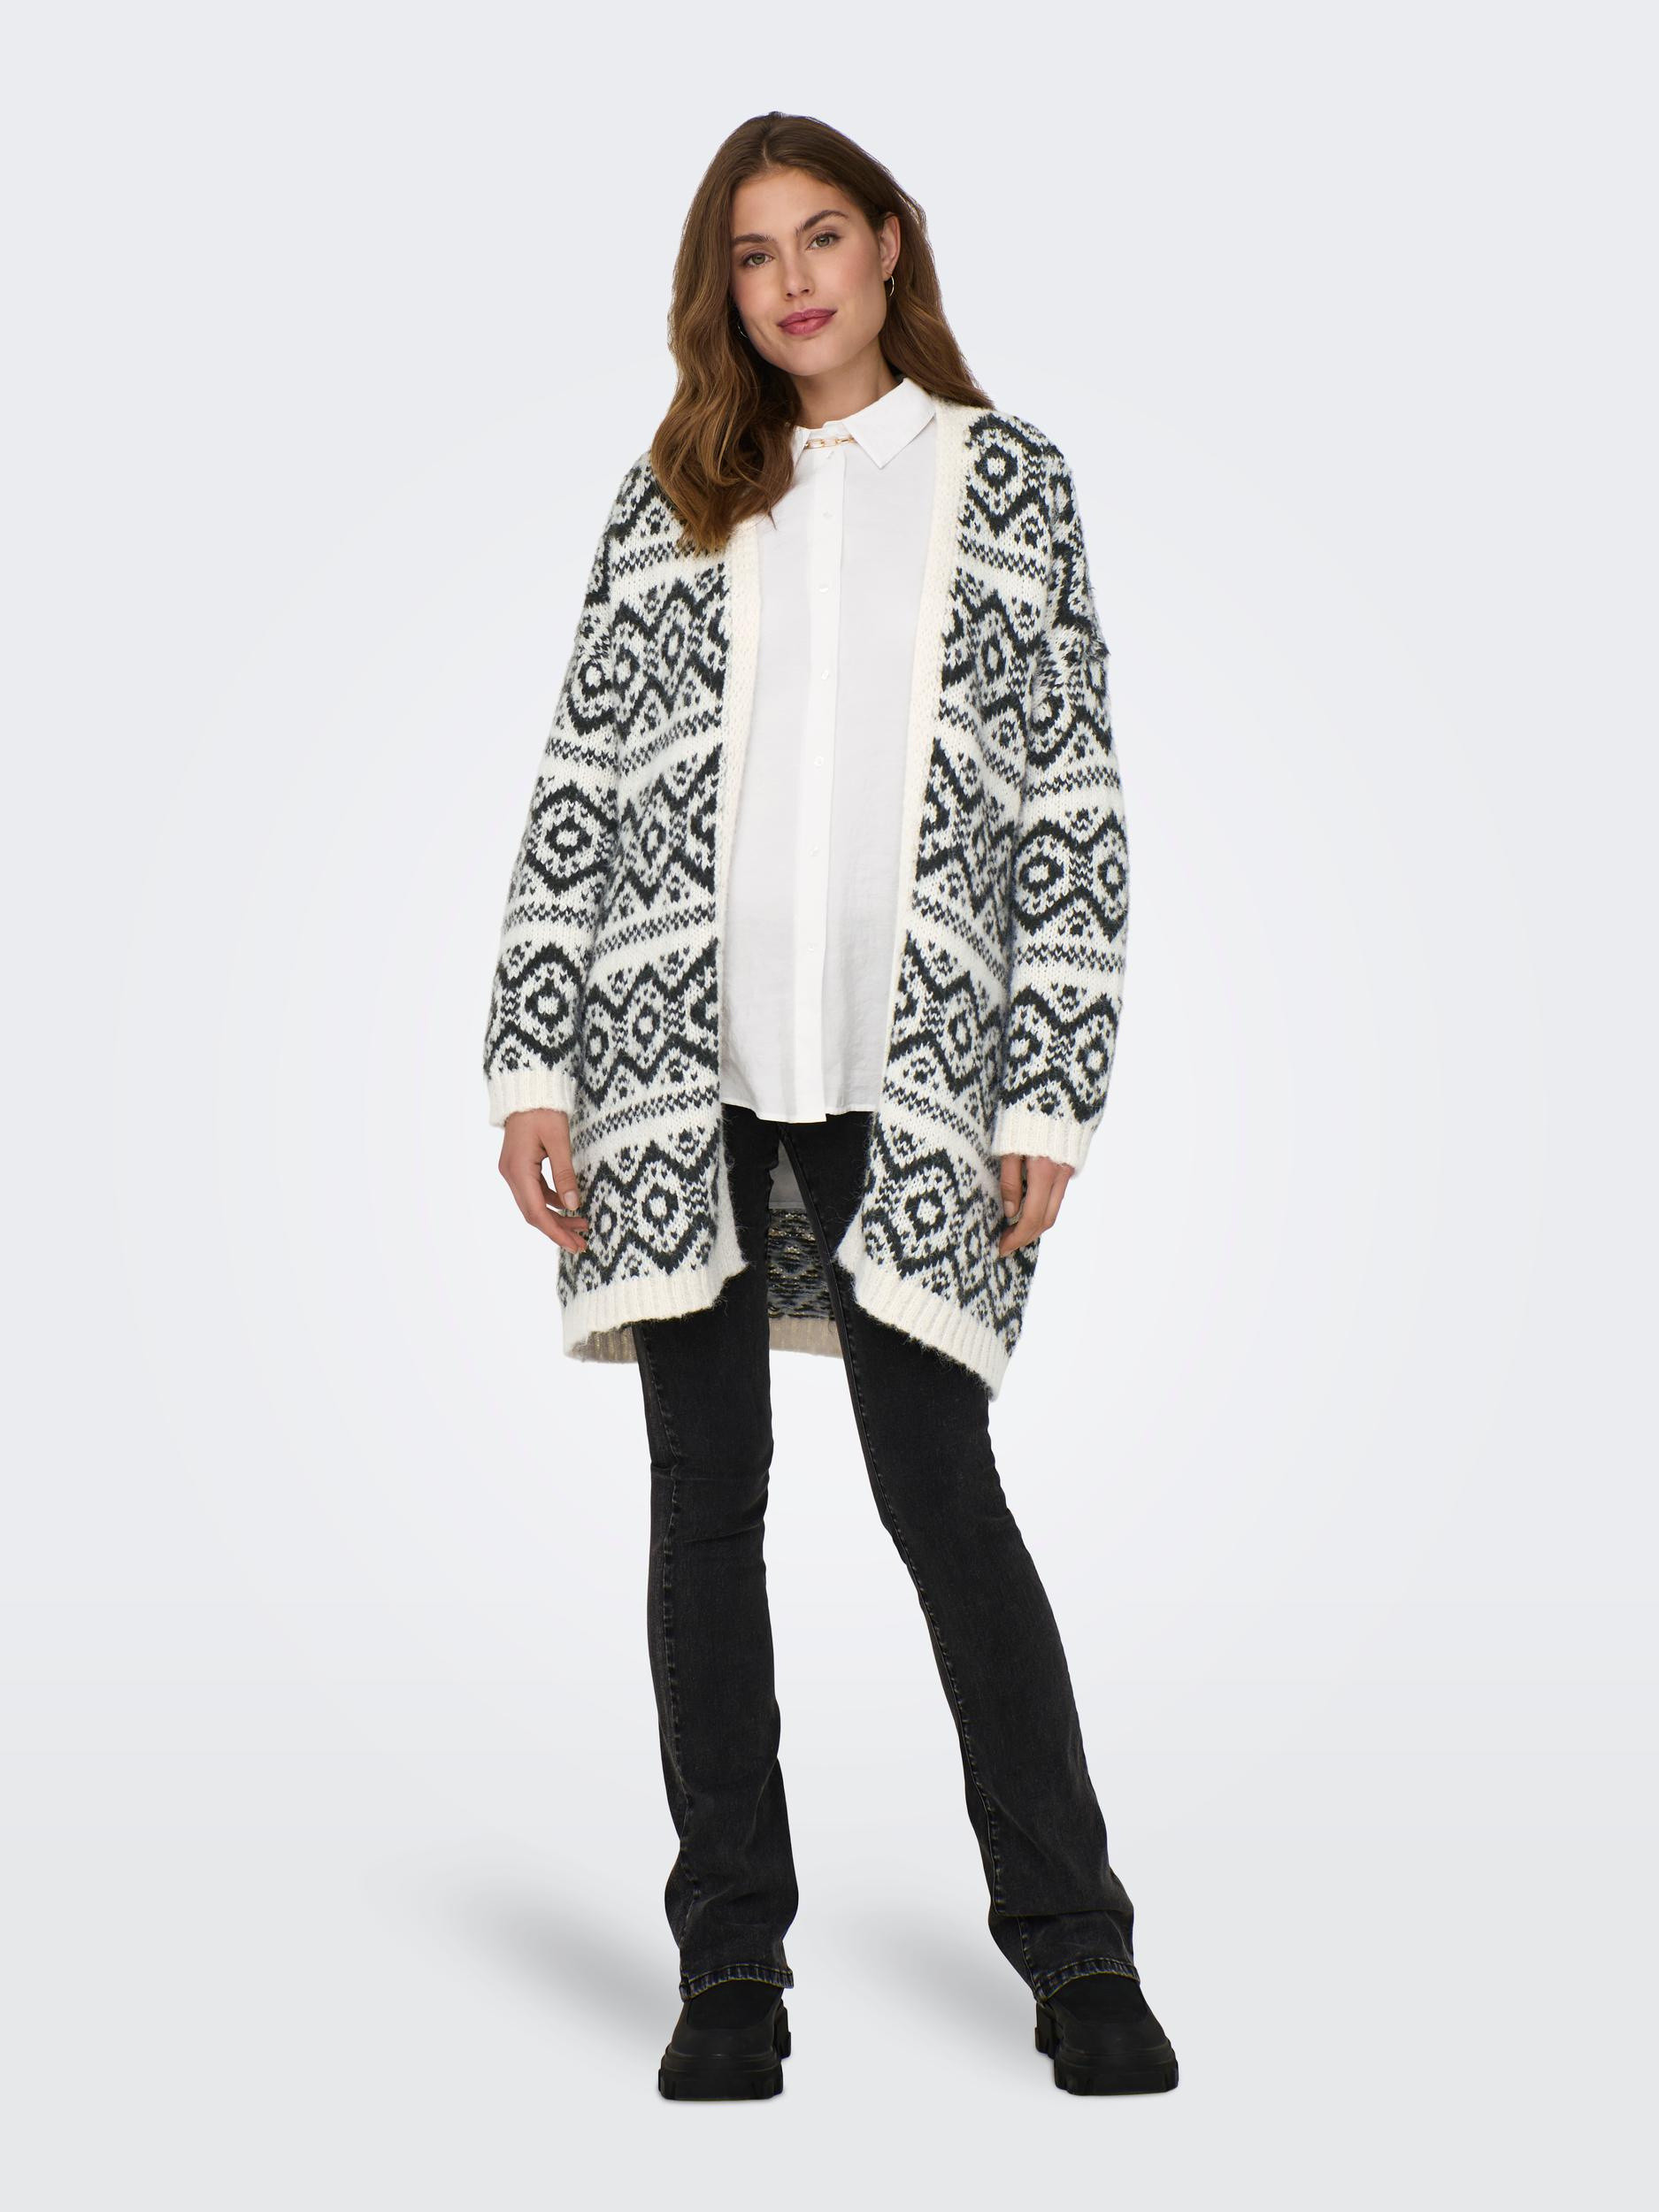 Only - Long cardigan with print, Grey, large image number 2